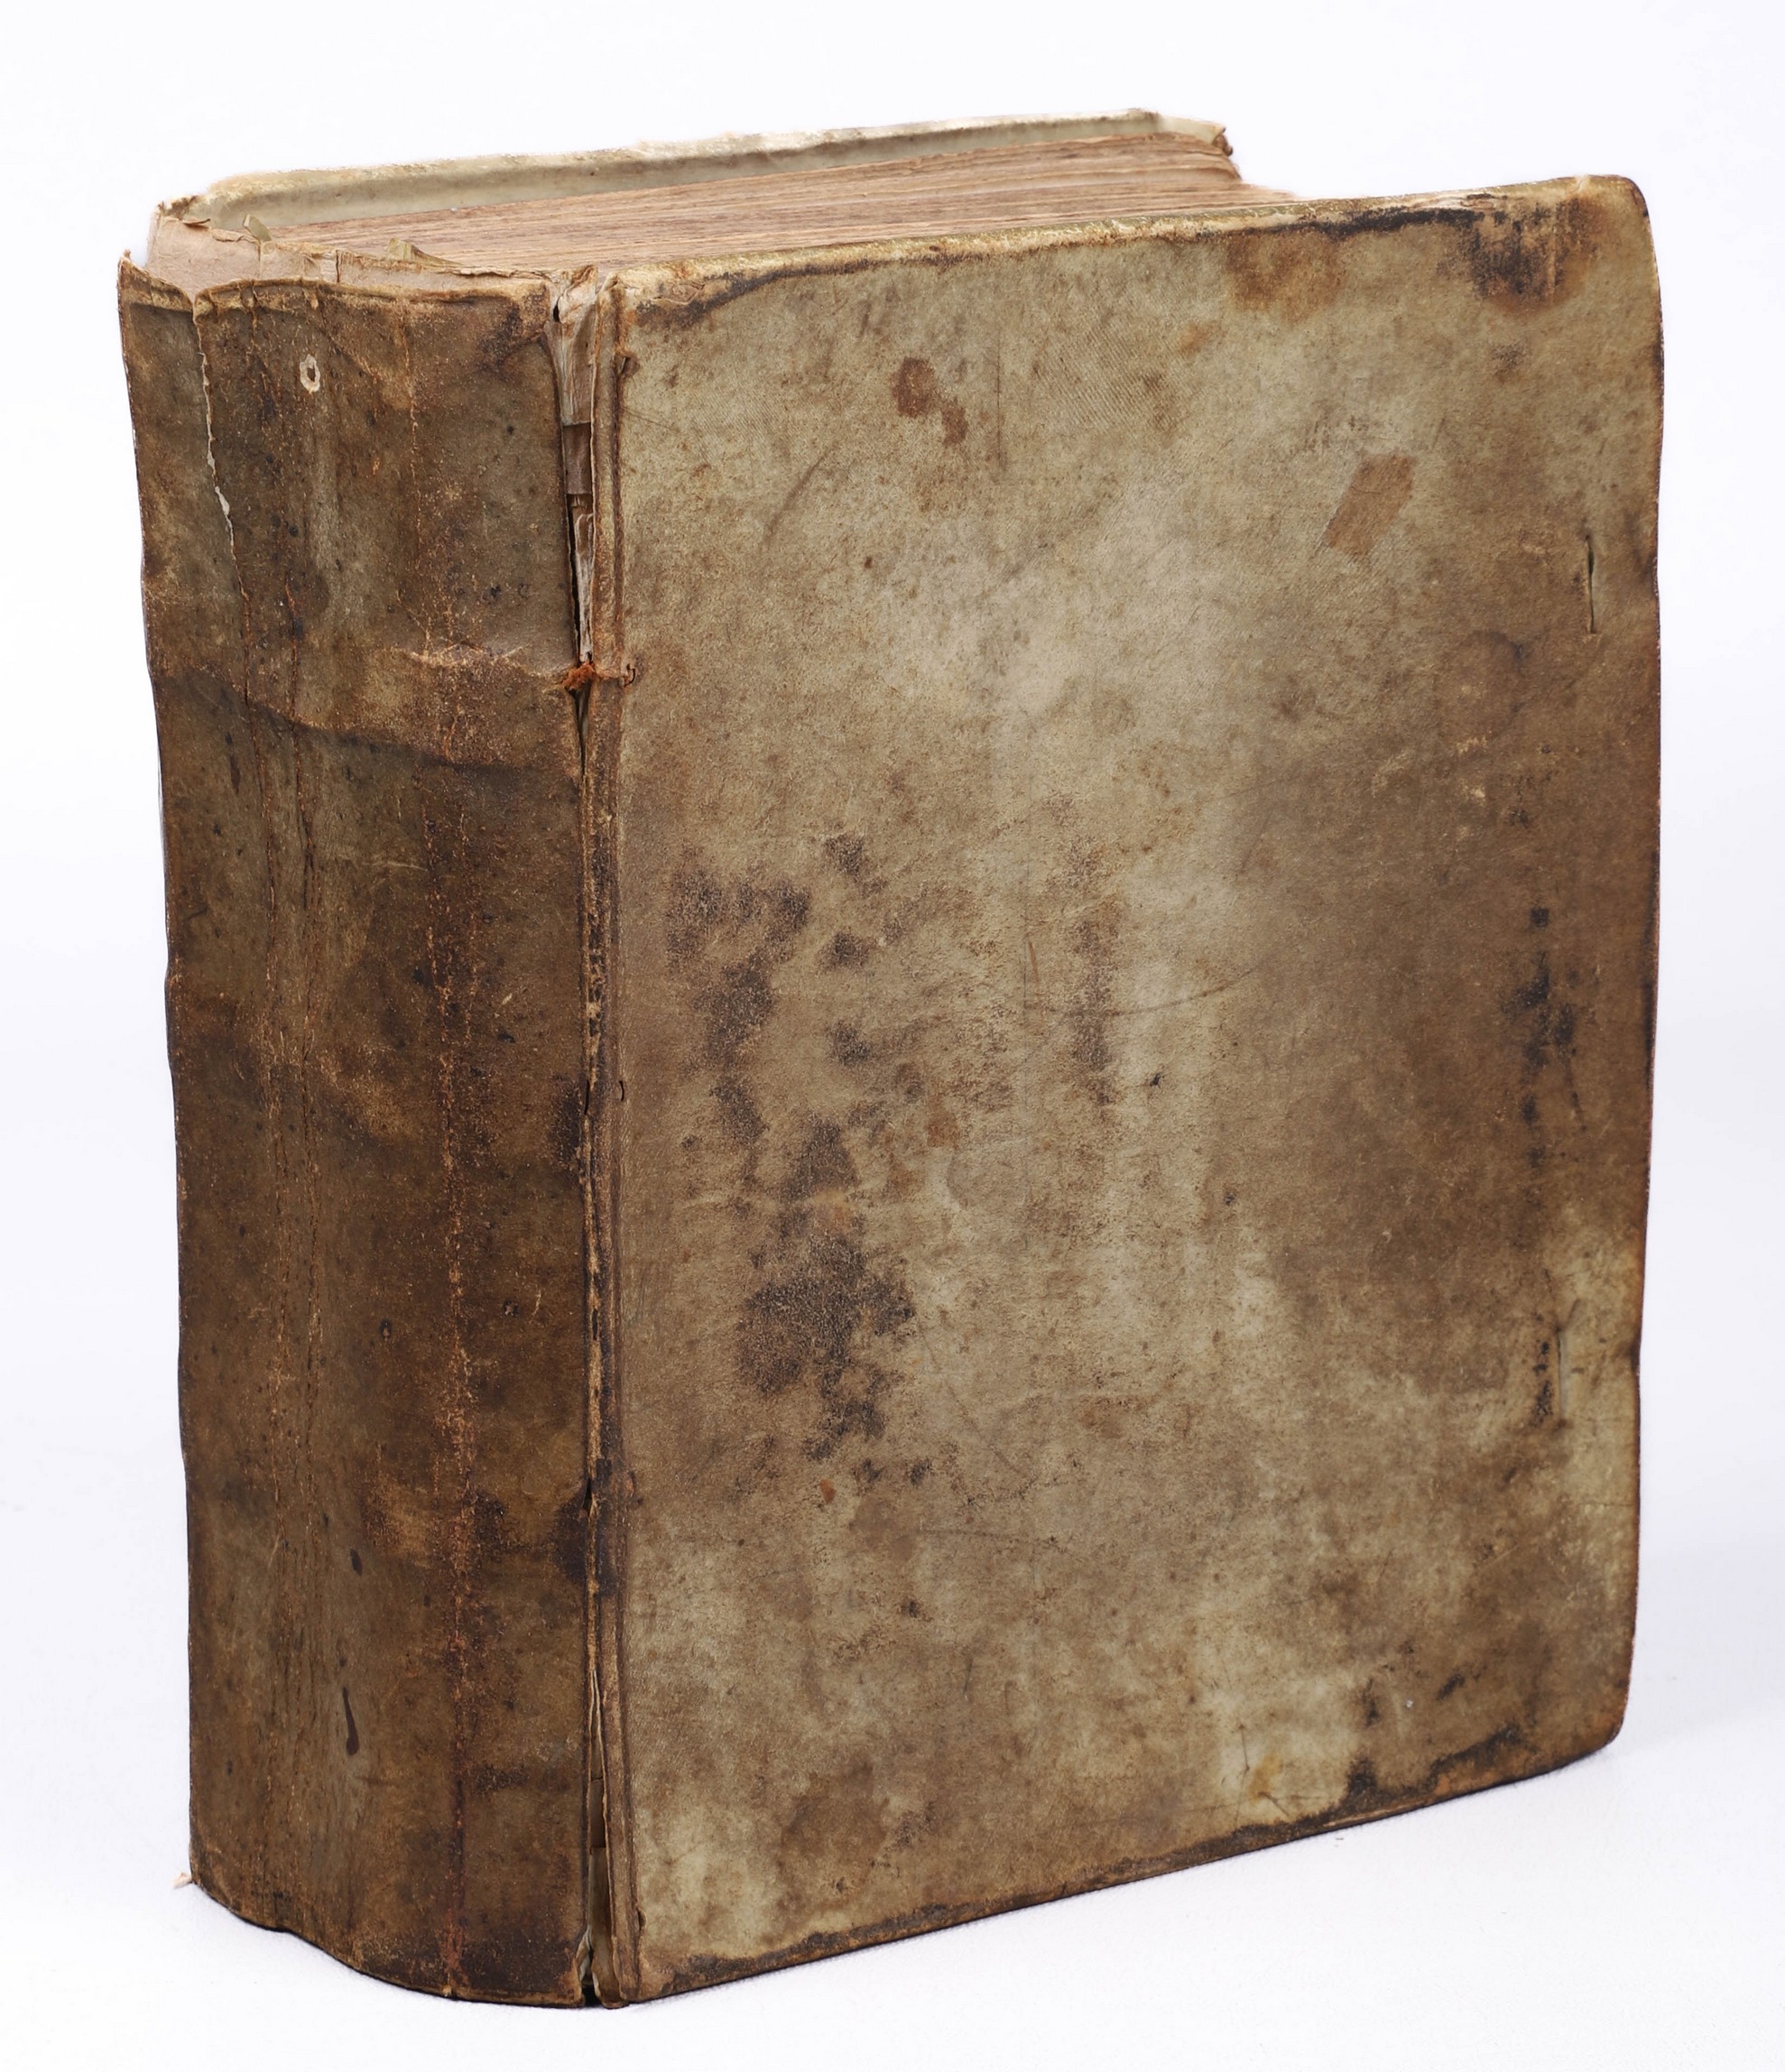 A book of sermons in an early vellum